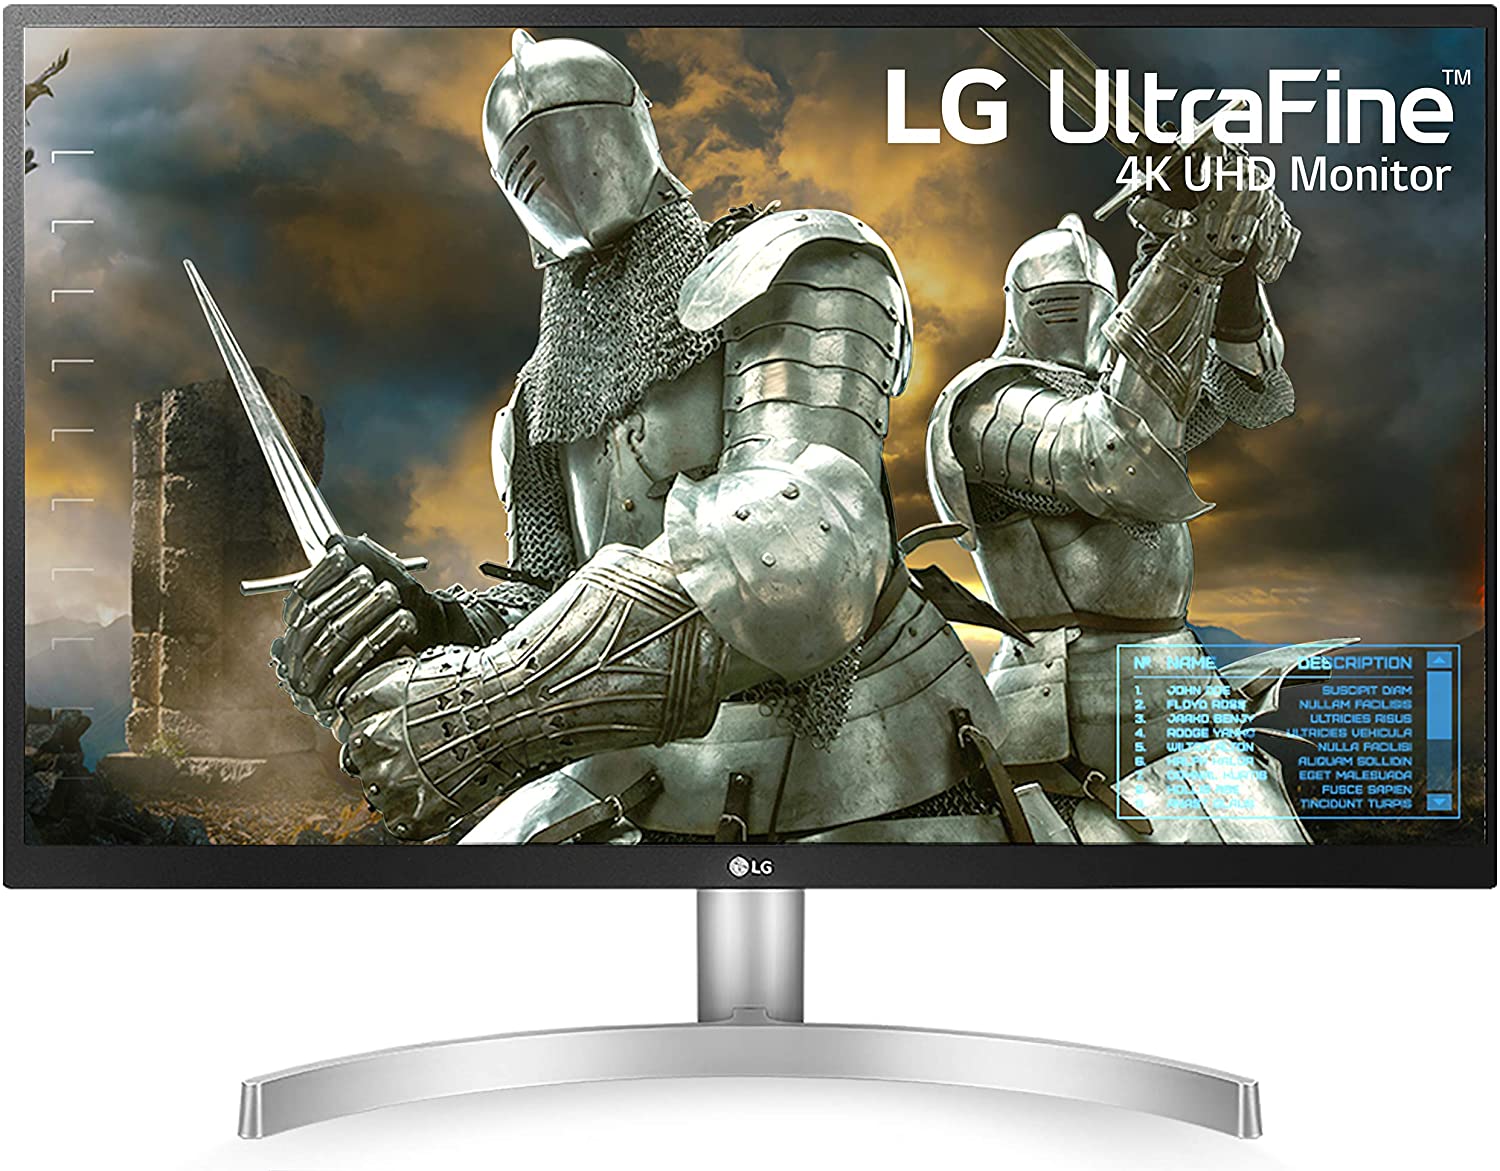 LG 27UL500-W Monitor Review in 2021